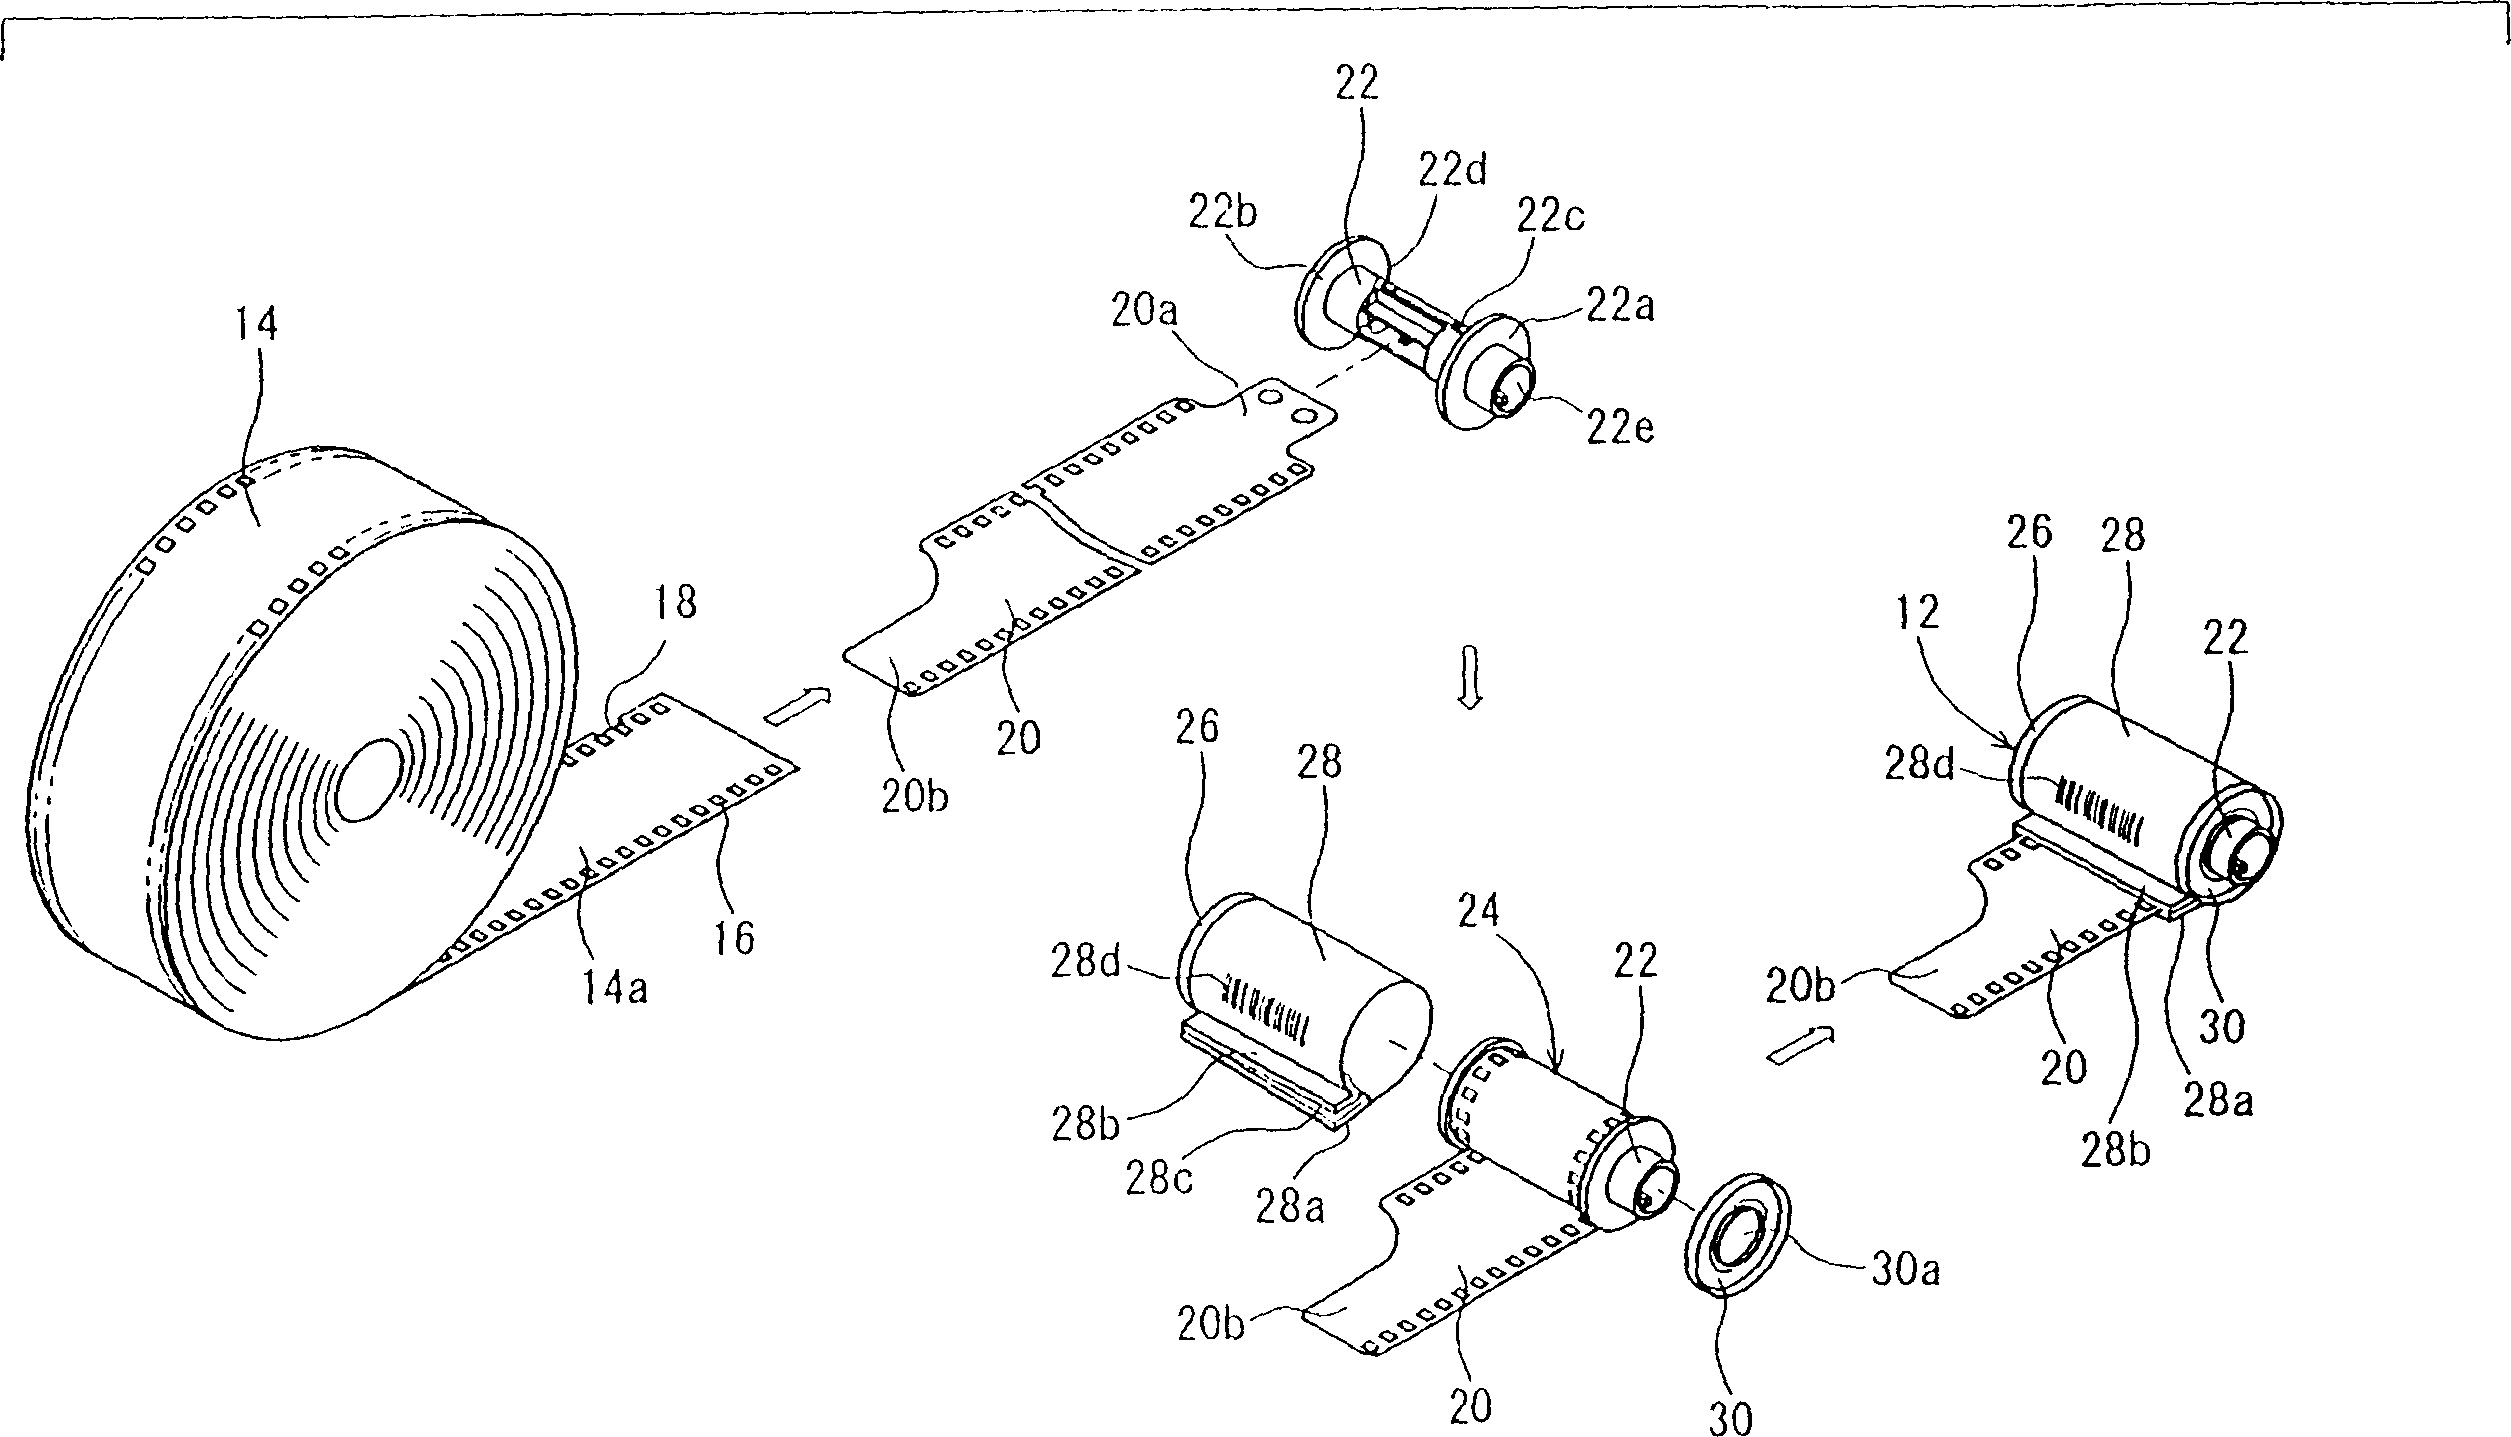 Equipment and method for producing photo film